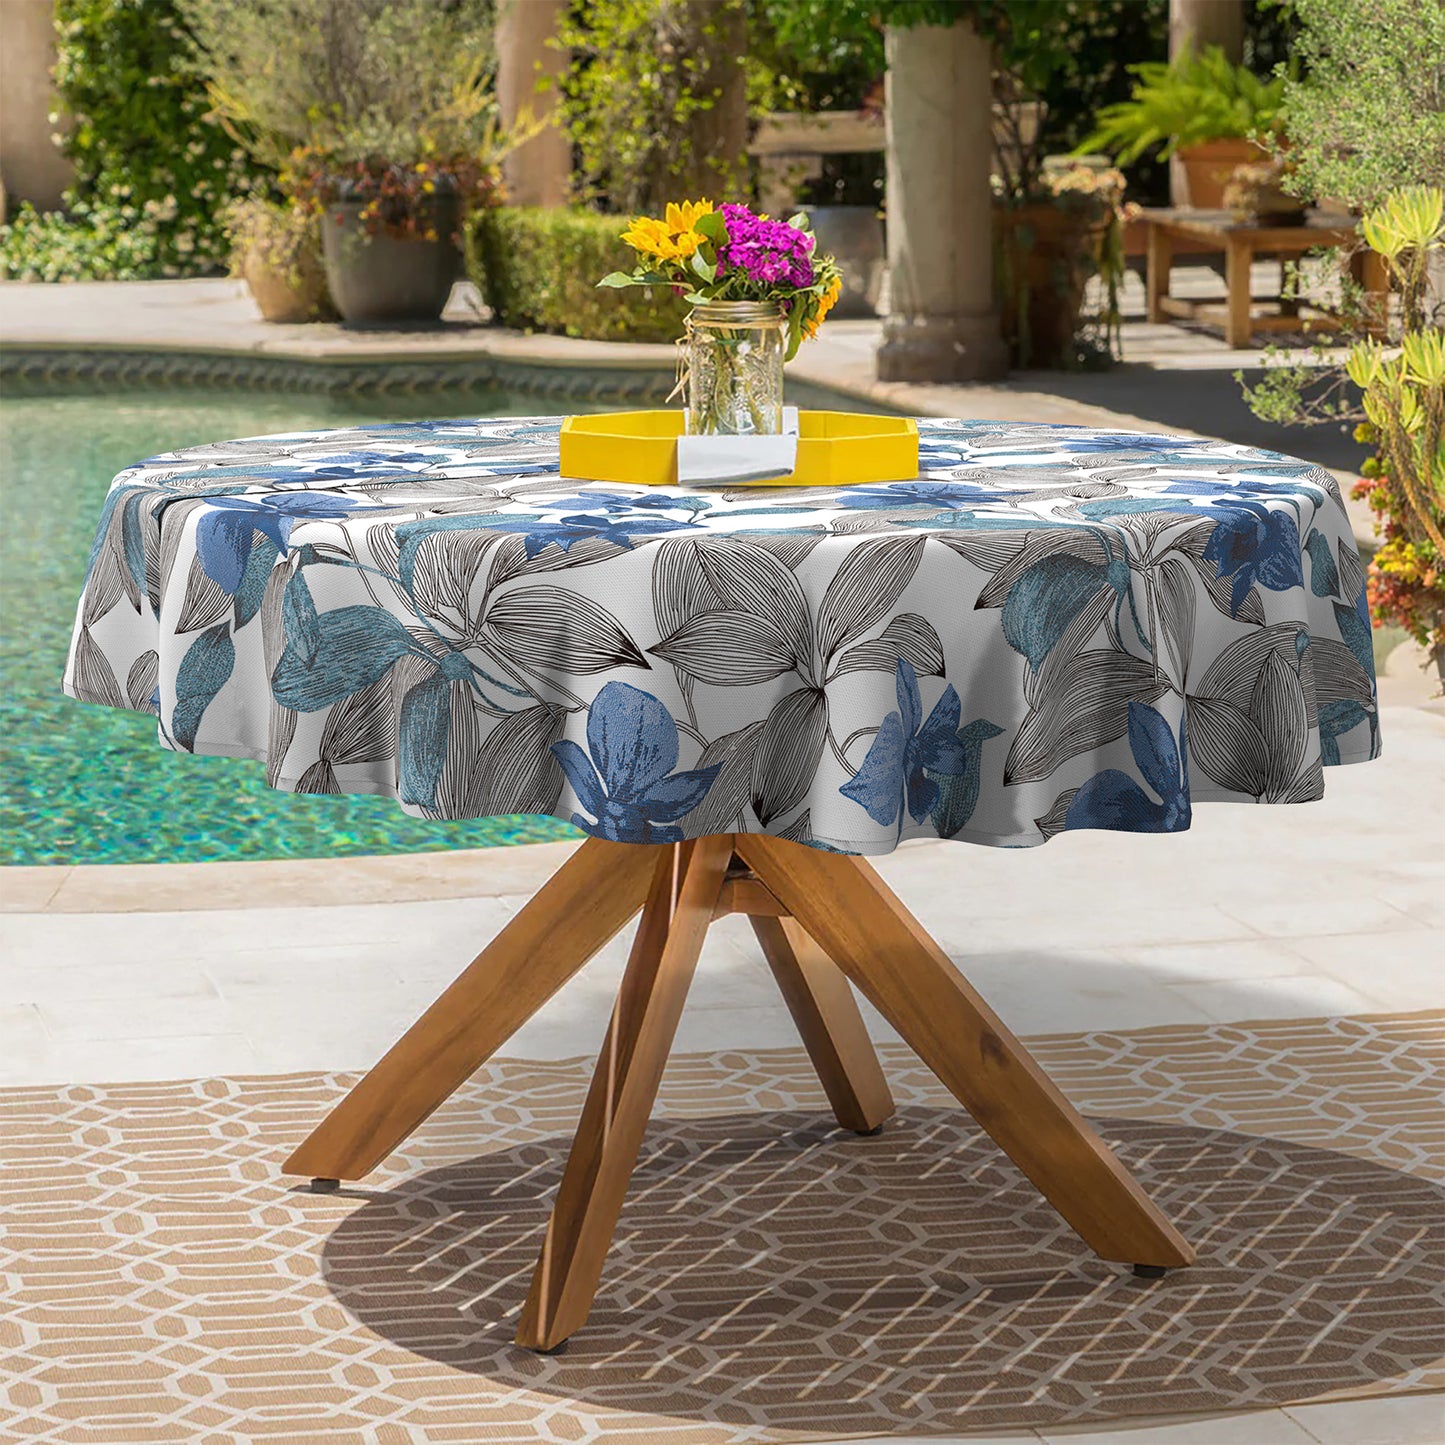 Melody Elephant Outdoor/Indoor Round Tablecloth with Umbrella Hole Zipper, Decorative Circular Table Cover for Home Garden, 60 Inch, Clemens Blue